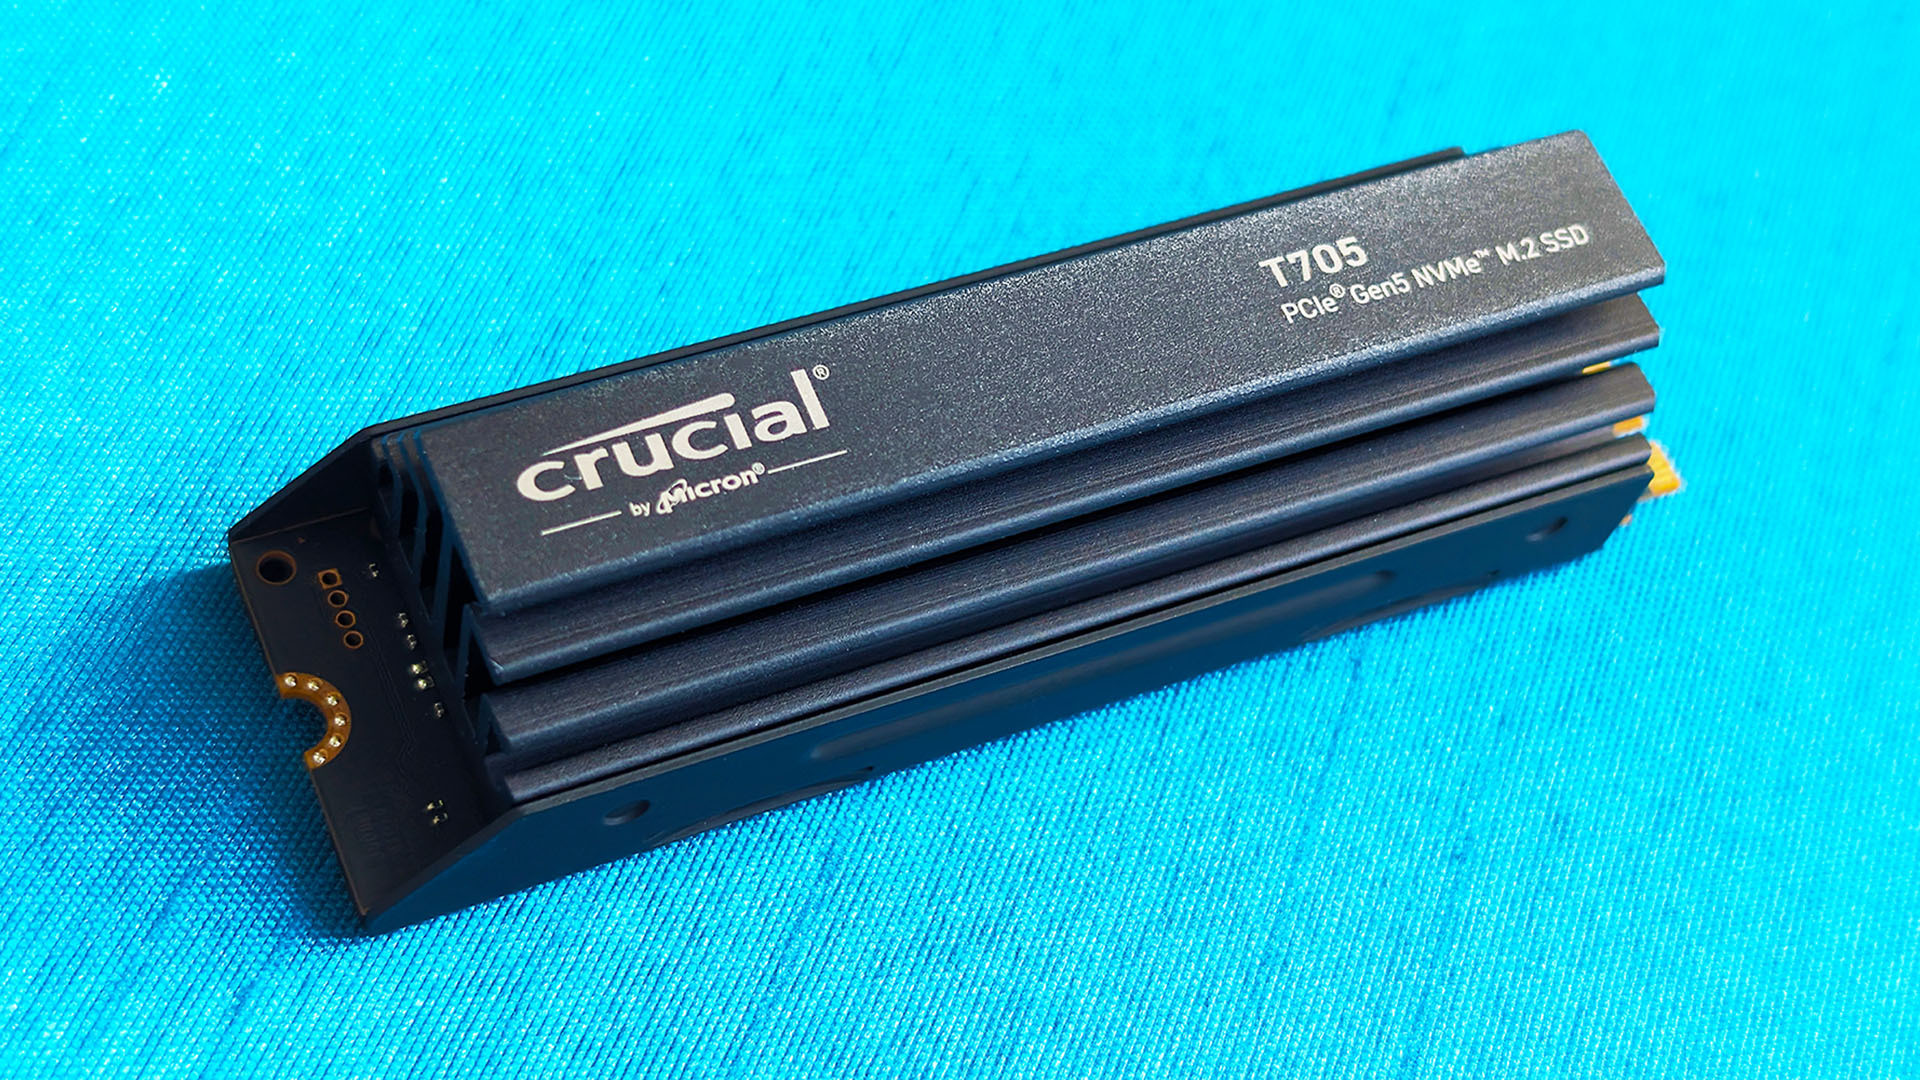 Crucial T705 review – an SSD that puts speed above all